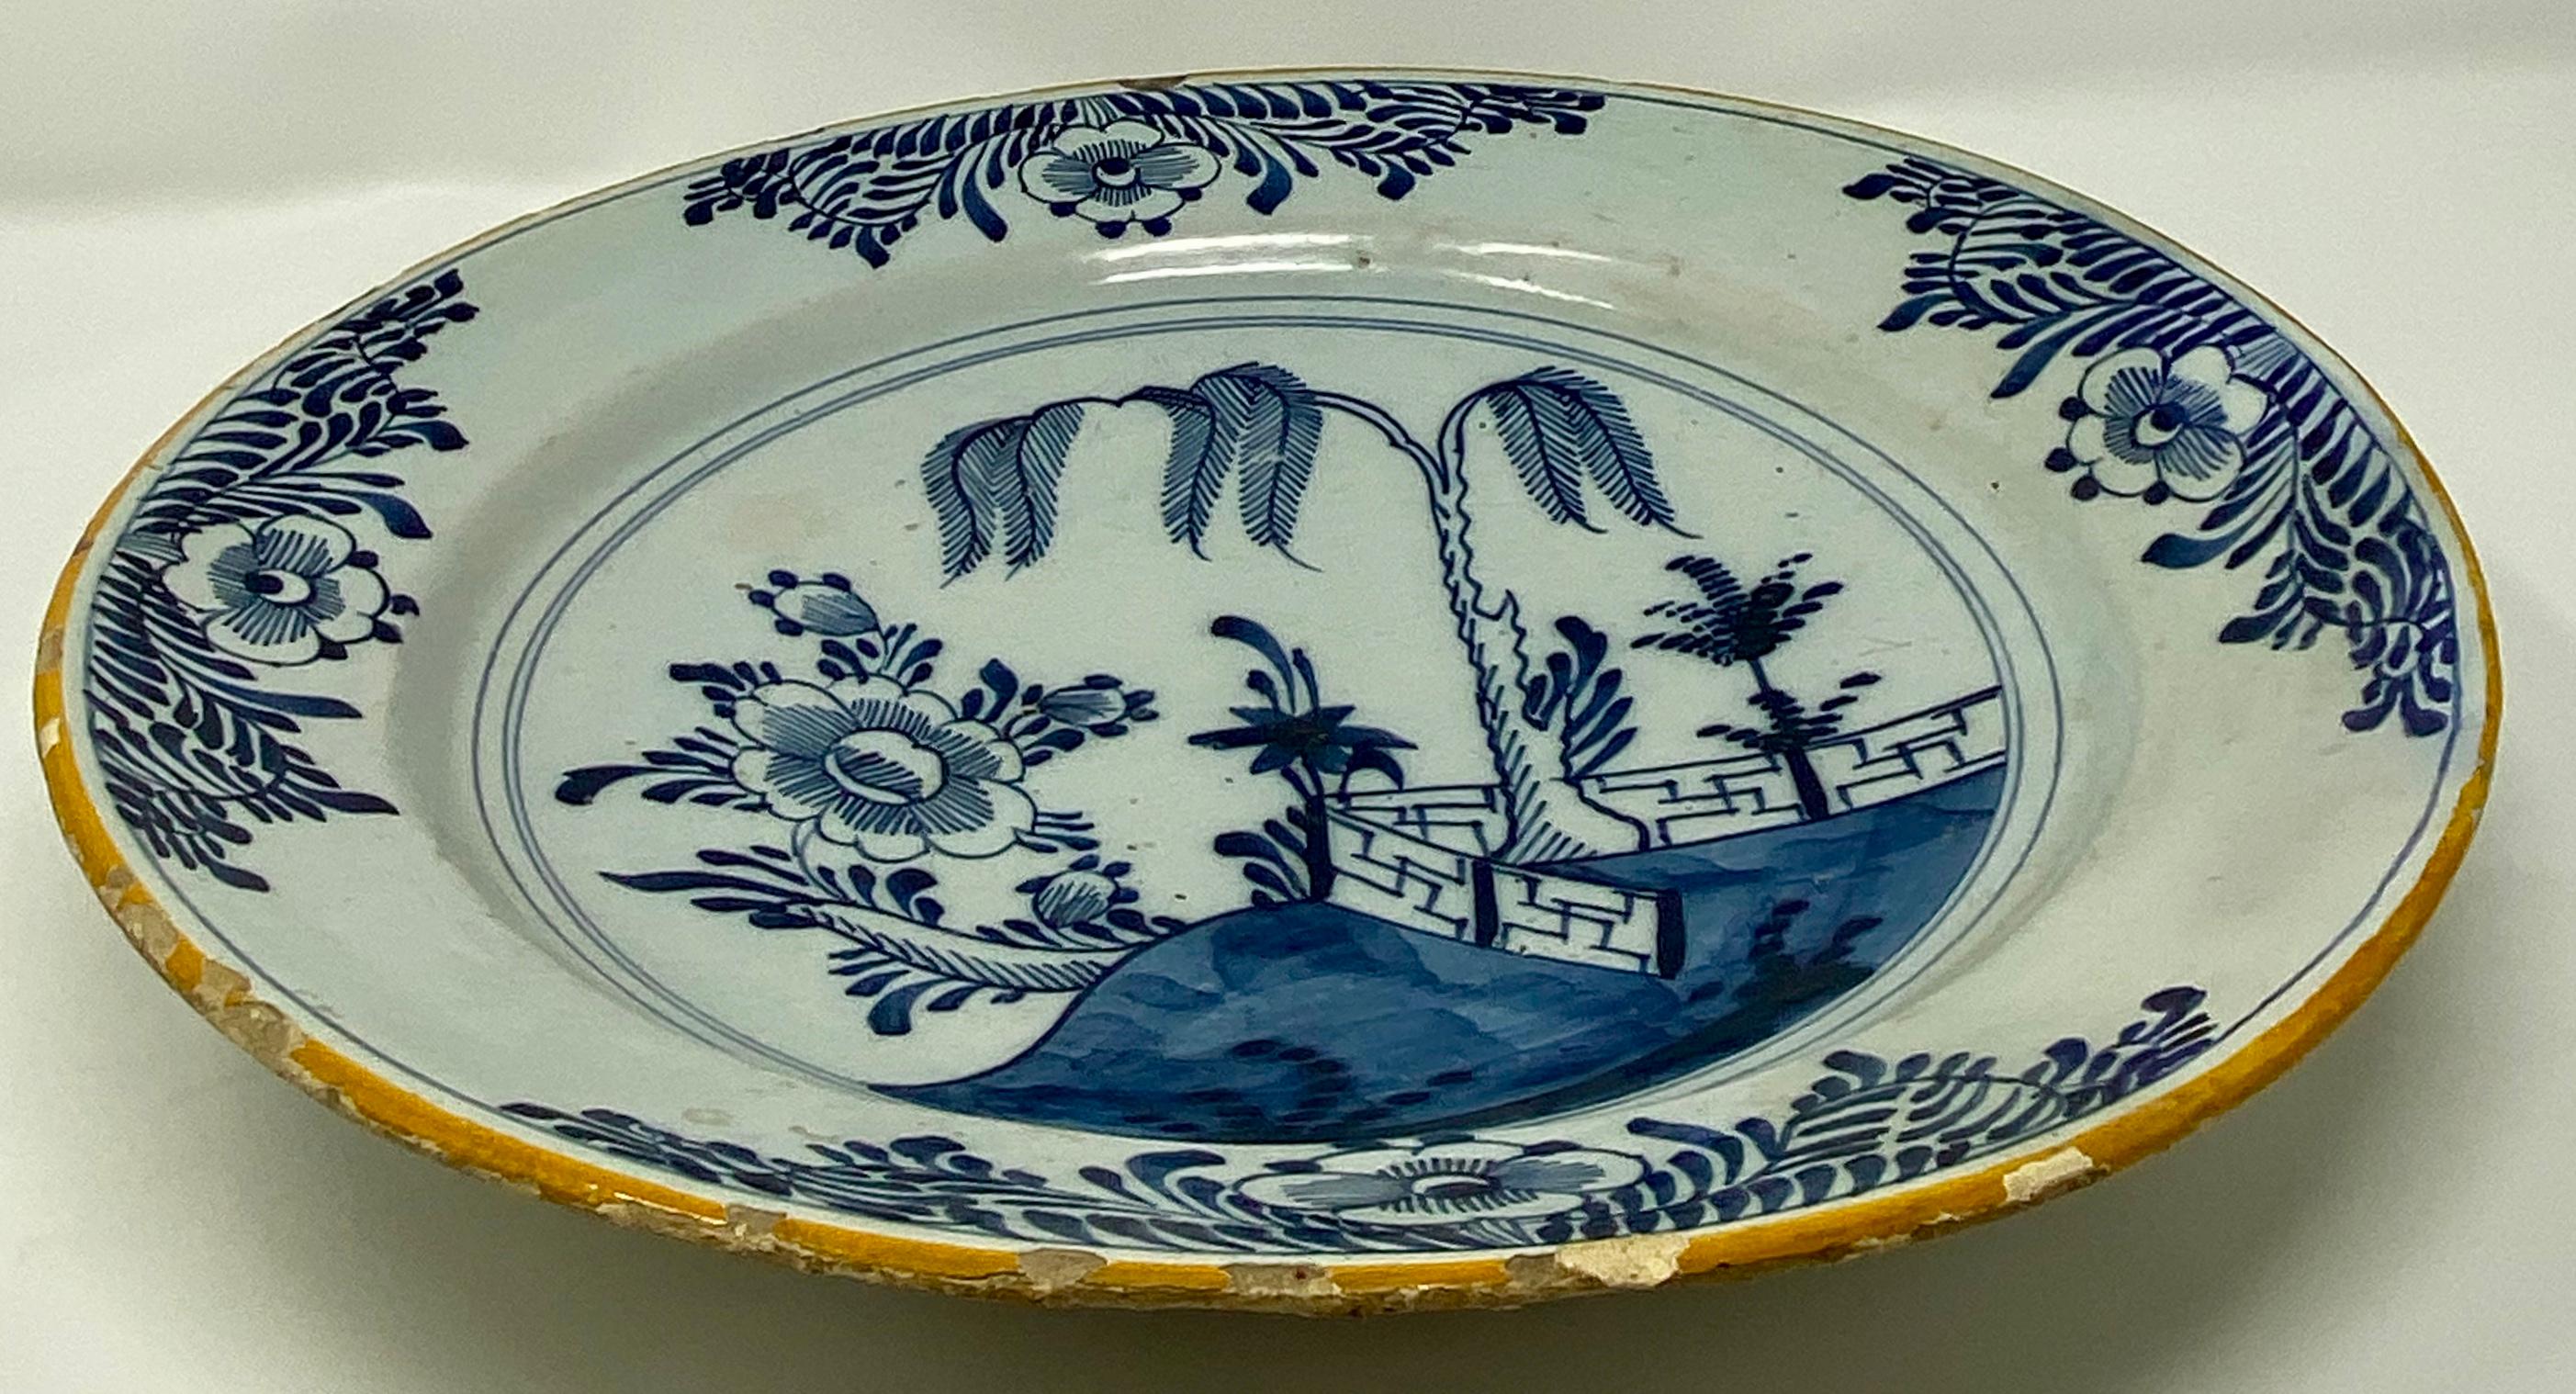 Antique Dutch Porcelain charger in the Chinese manner, circa 1750-1780. This is a very old, delicate piece. Please ask us about condition as we can send additional photos should you have any concerns.